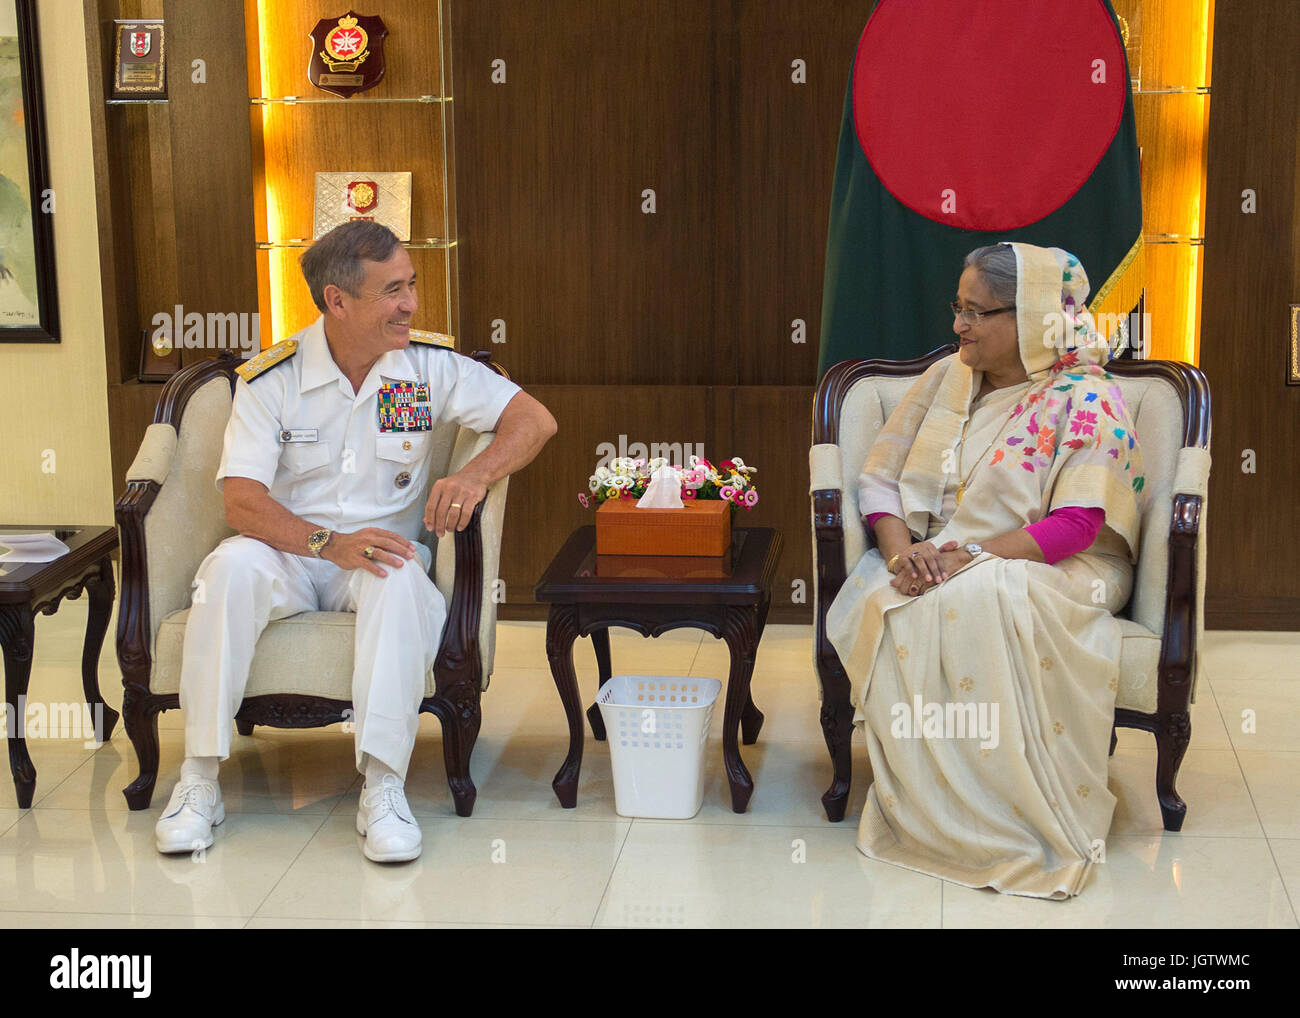 170709-N-WY954-165DHAKA, BANGLADESH (July 9, 2017) – Adm. Harry Harris, Commander U.S. Pacific Command (PACOM), meets with Prime Minister of Bangladesh Sheikh Hasina. This is Harris’ first visit to Bangladesh as PACOM commander. During the visit he met with counterparts and government officials for discussions on military cooperation and regional security initiatives in the Indo-Asia Pacific. (U.S. Navy photo by Mass Communications Specialist 2nd Class Robin W. Peak/ Released) Stock Photo